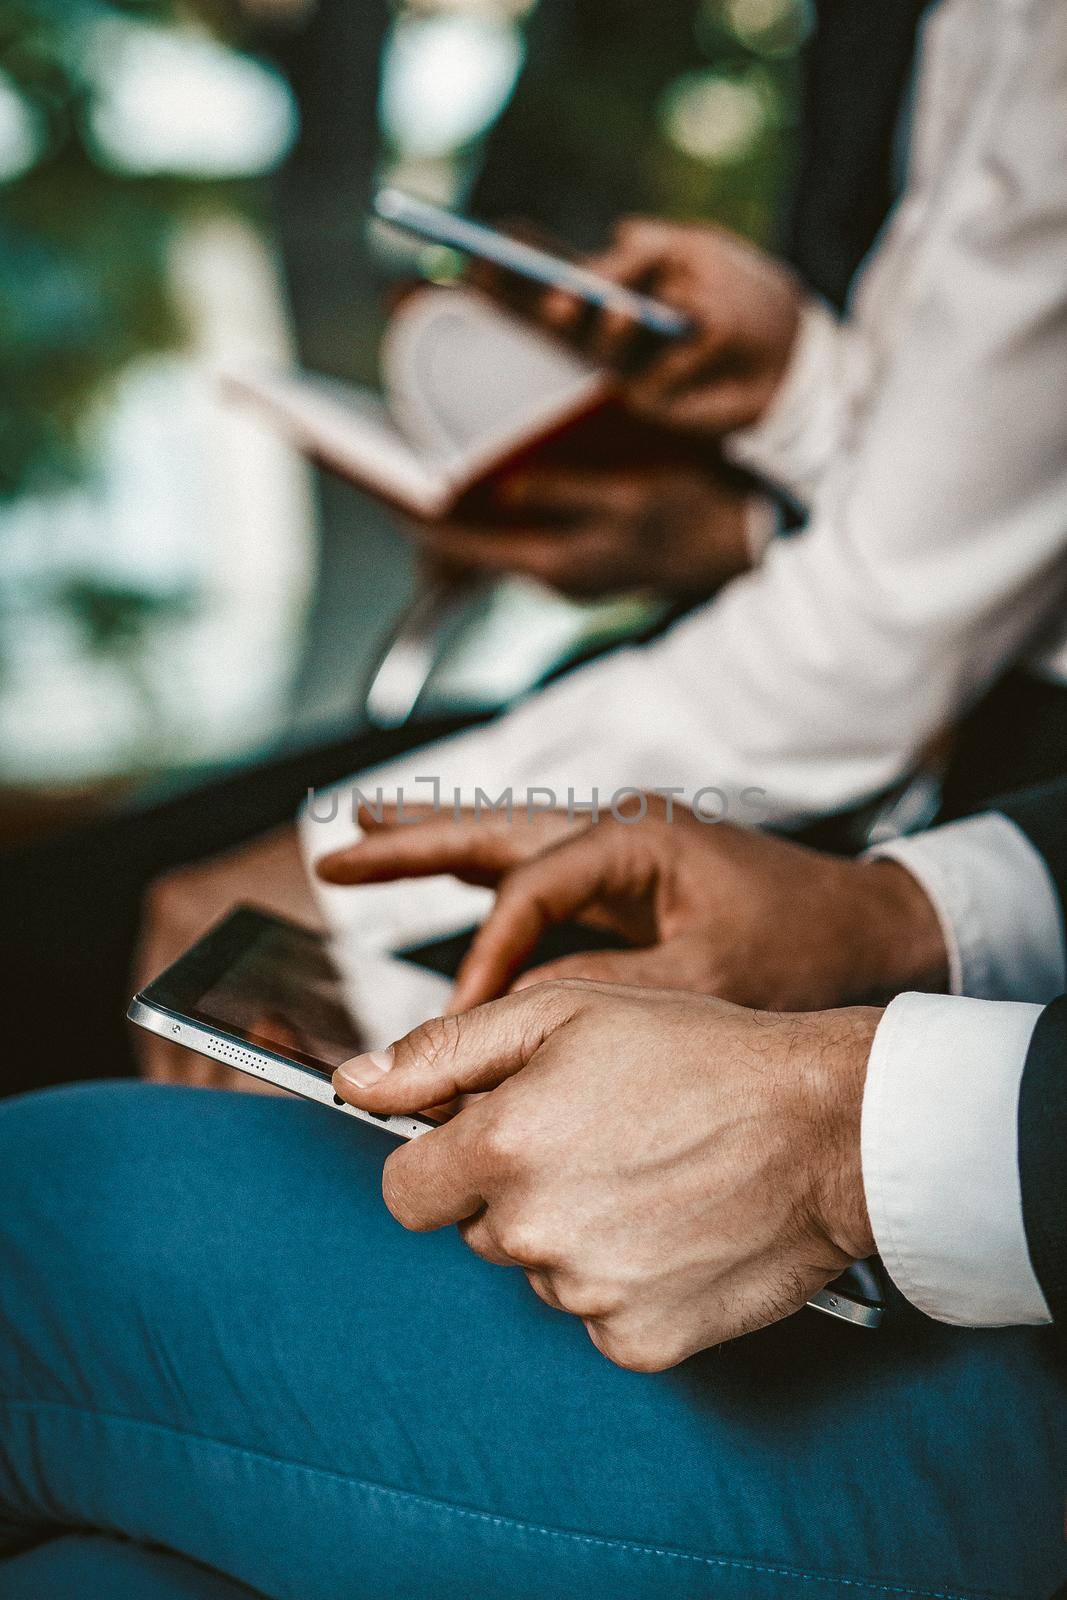 Coworkers Team Are Preparing Before Business Meeting, Selective Focus On Male Hands Making Notes While Using Laptop In Foreground, Close Up Shot, Toned Image